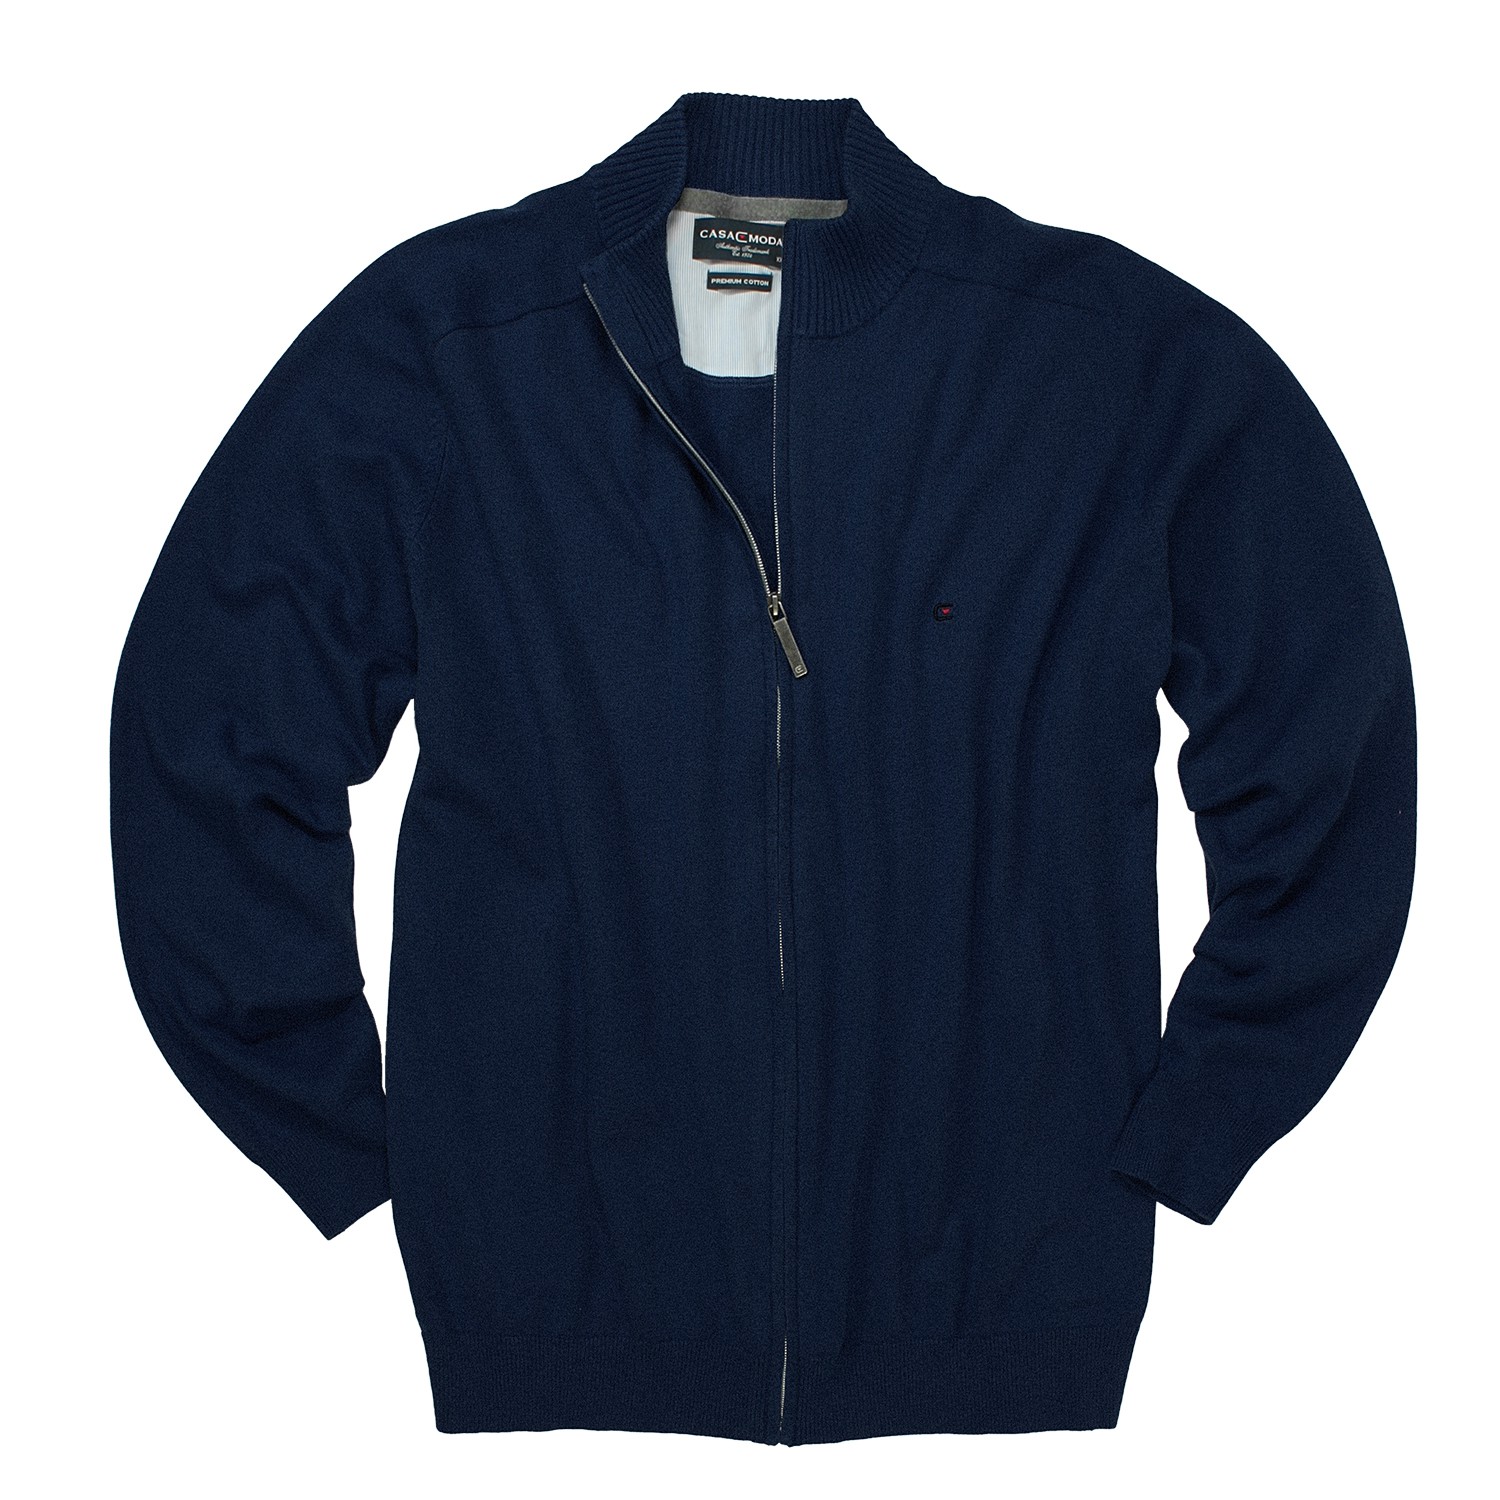 Cardigan for men by Casamoda in dark blue with zip in XXL sizes up to 6XL